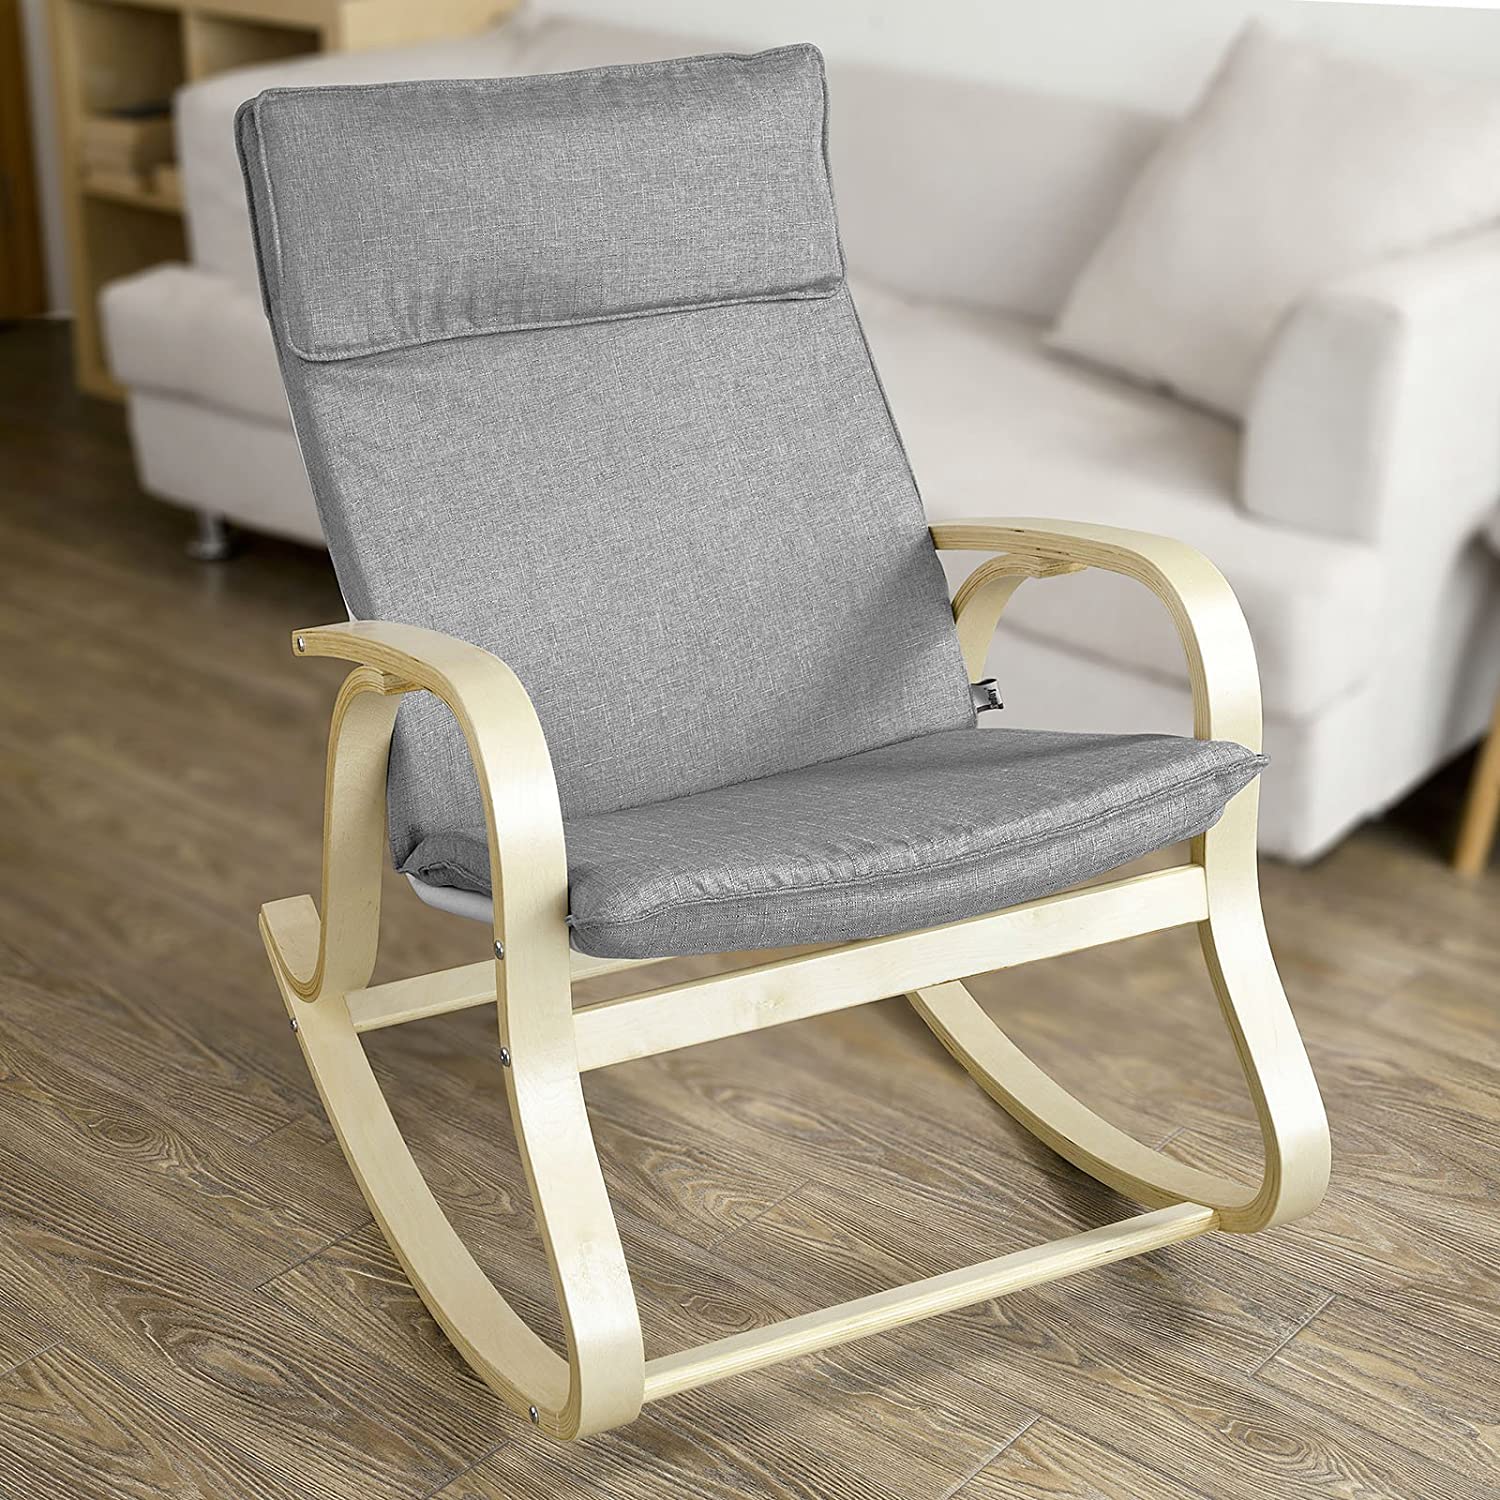 Comfortable Rocking Chair 